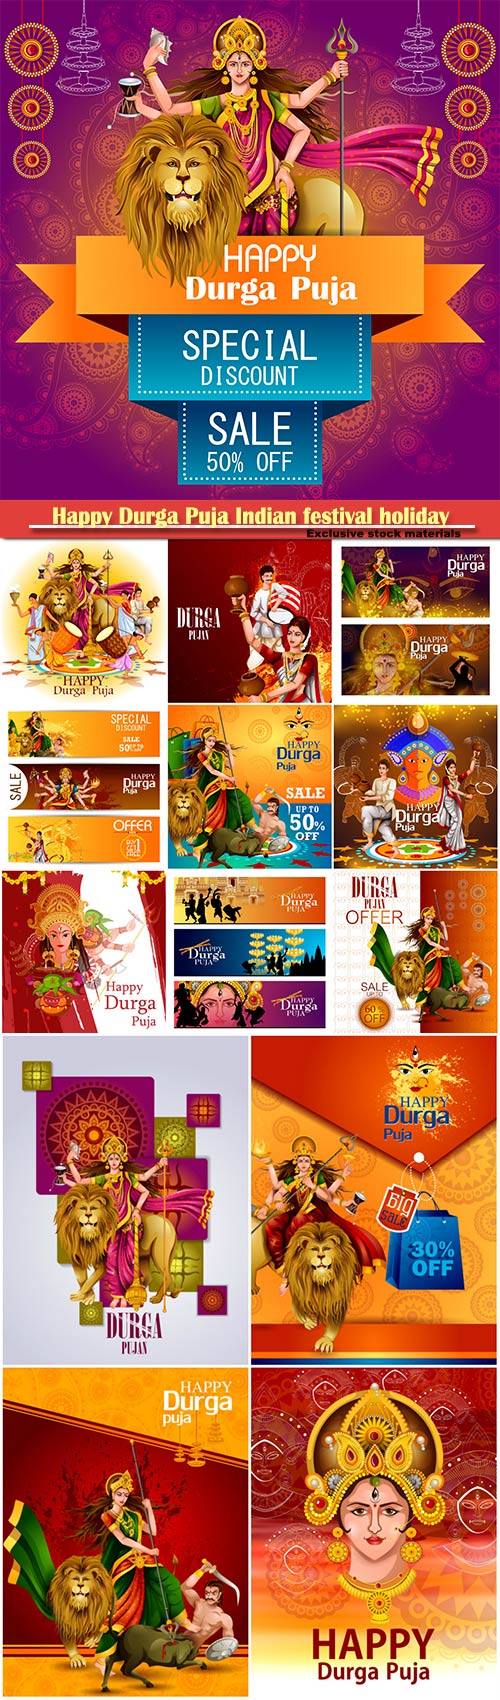 Happy Durga Puja Indian festival holiday vector background # 5